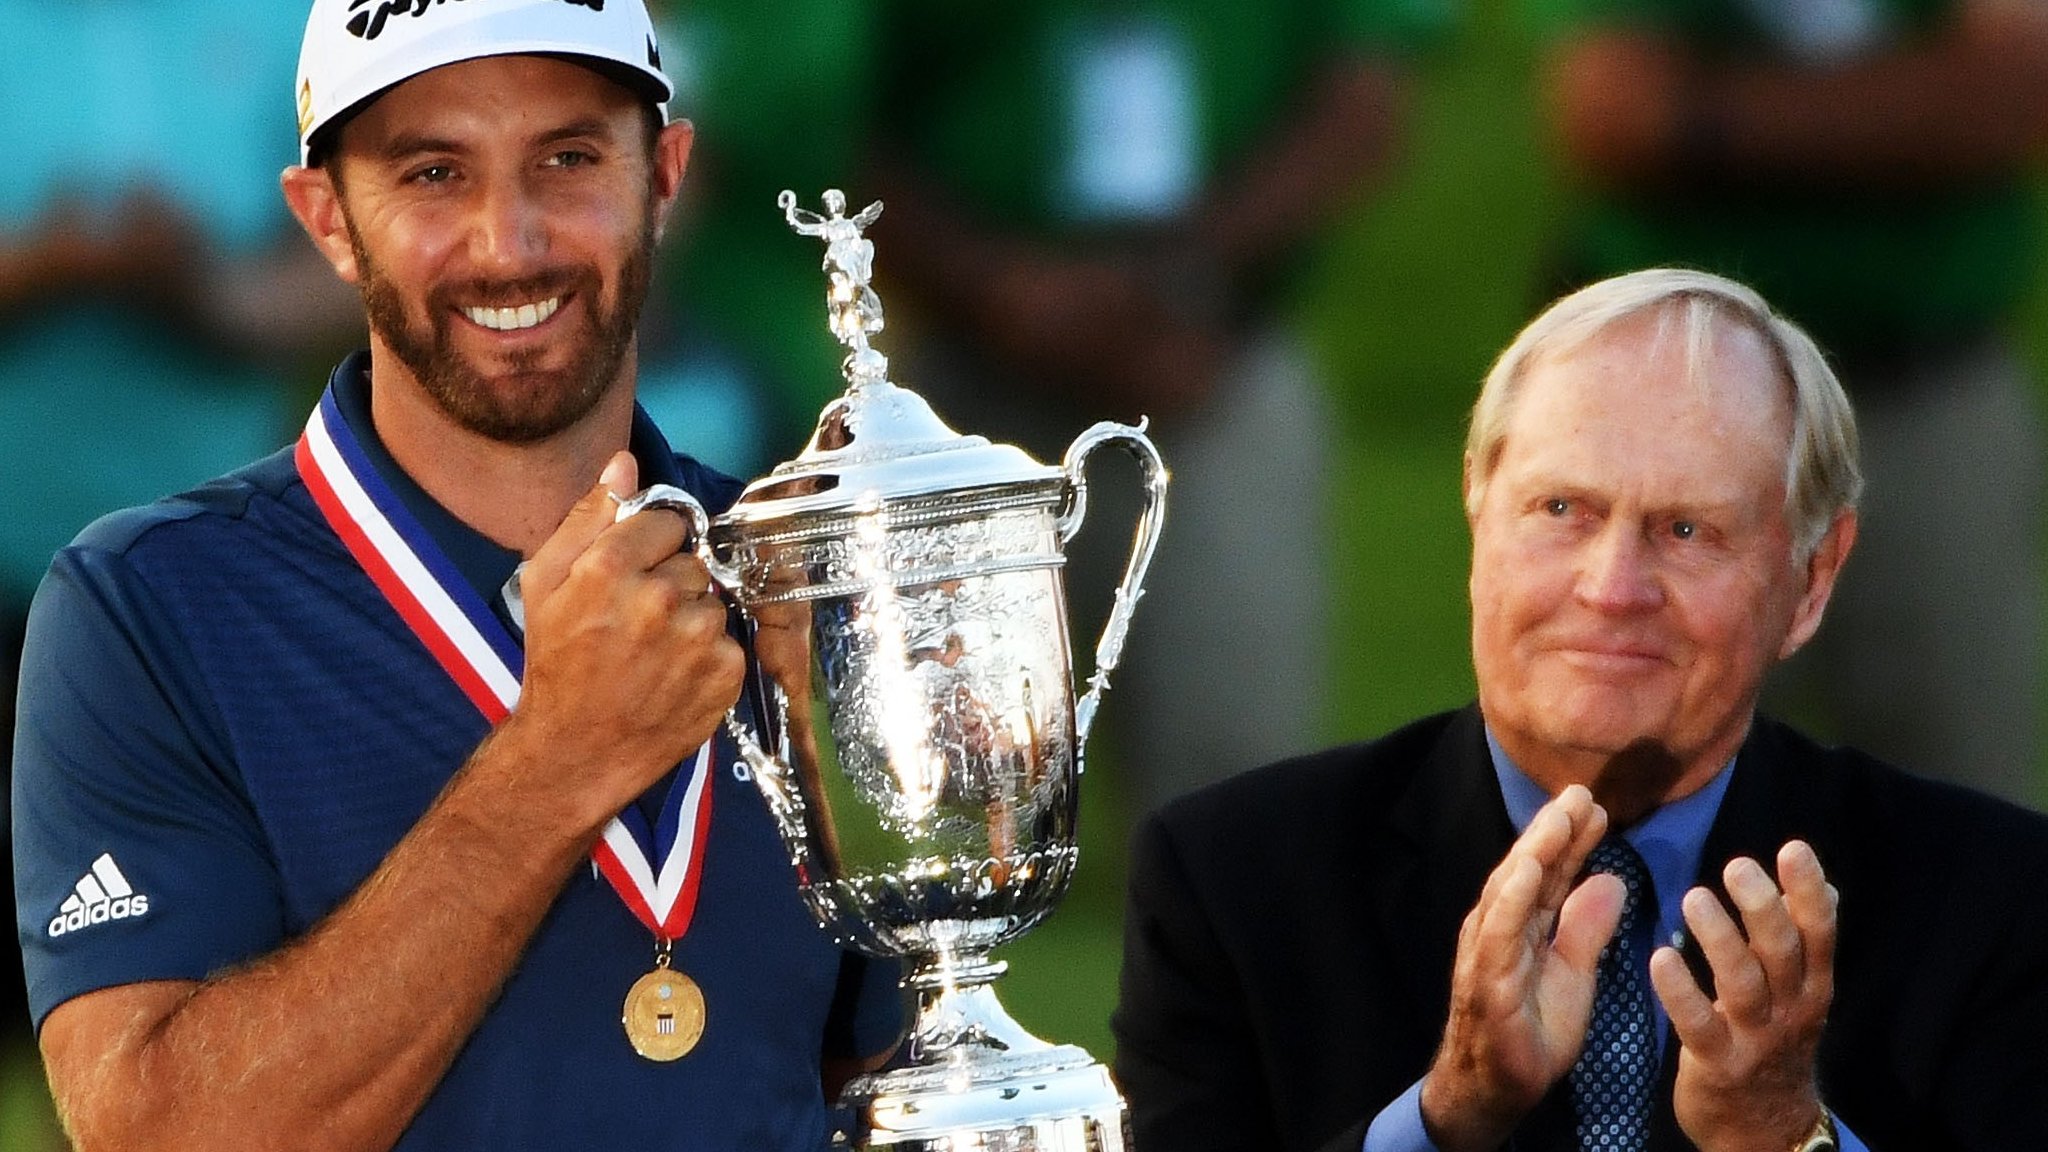 US Open 2016: Dustin Johnson wins first major amid farcical finish at Oakmont